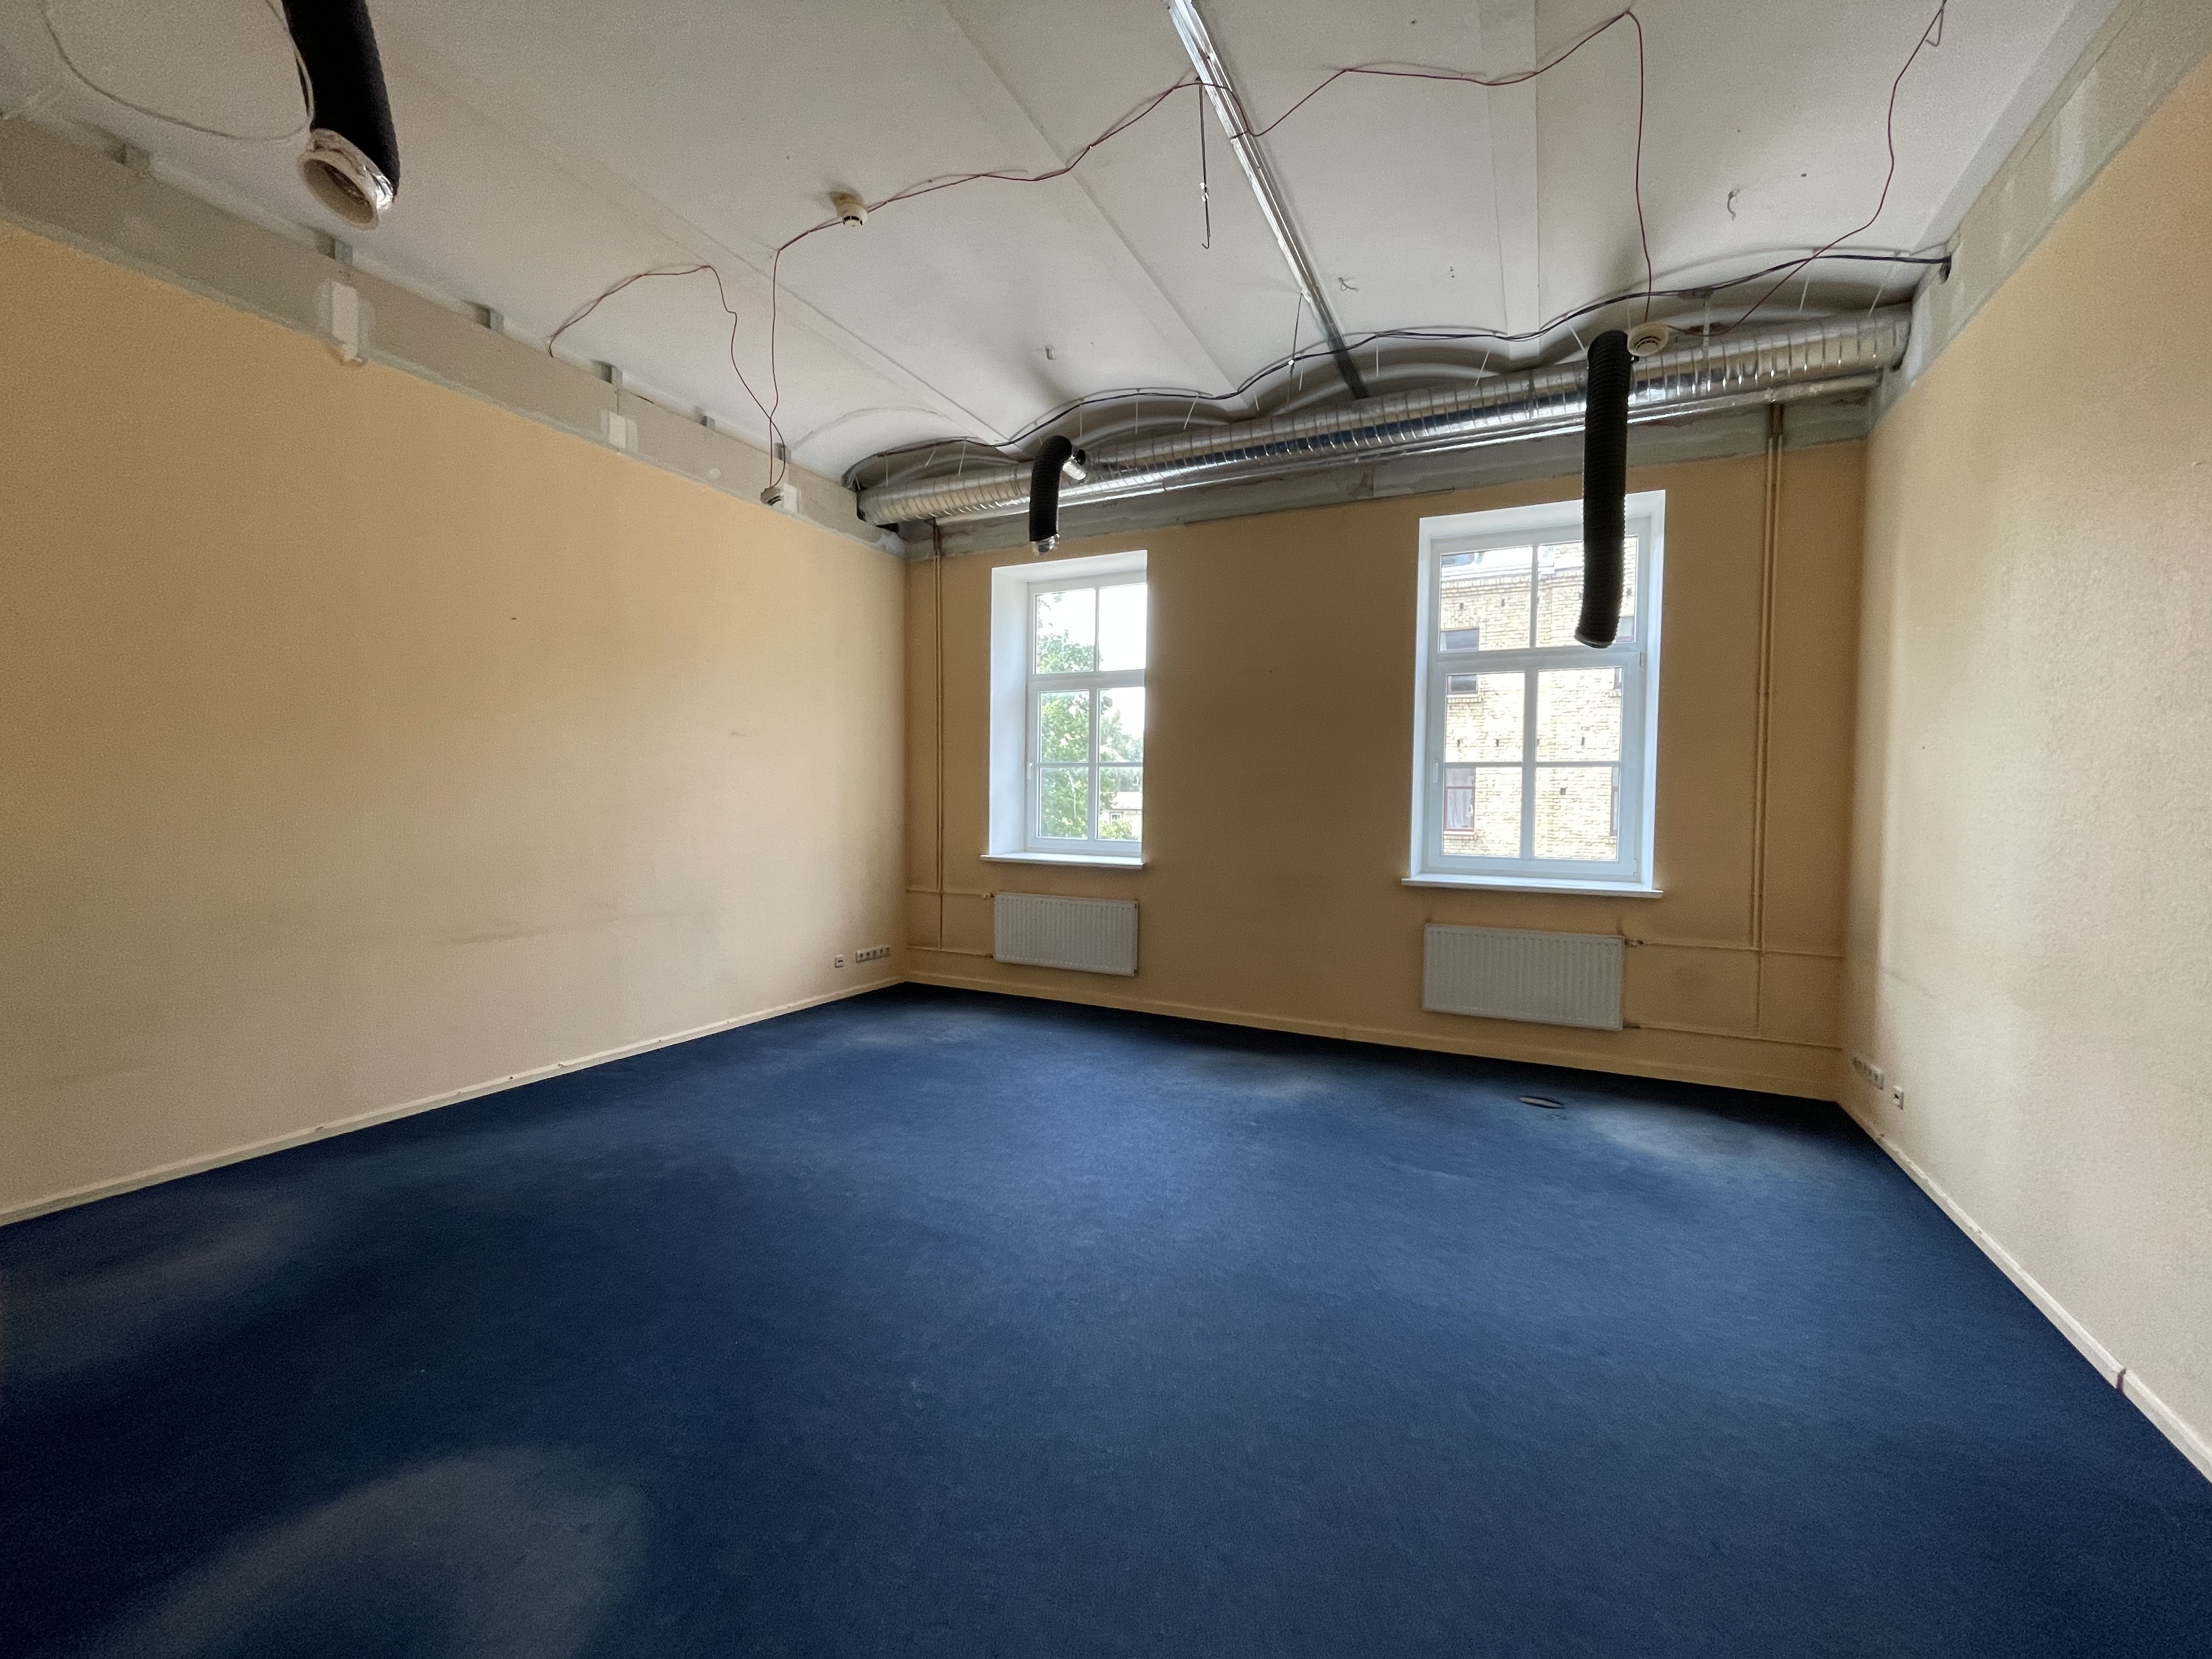 Investment property, Aiviekstes street - Image 1